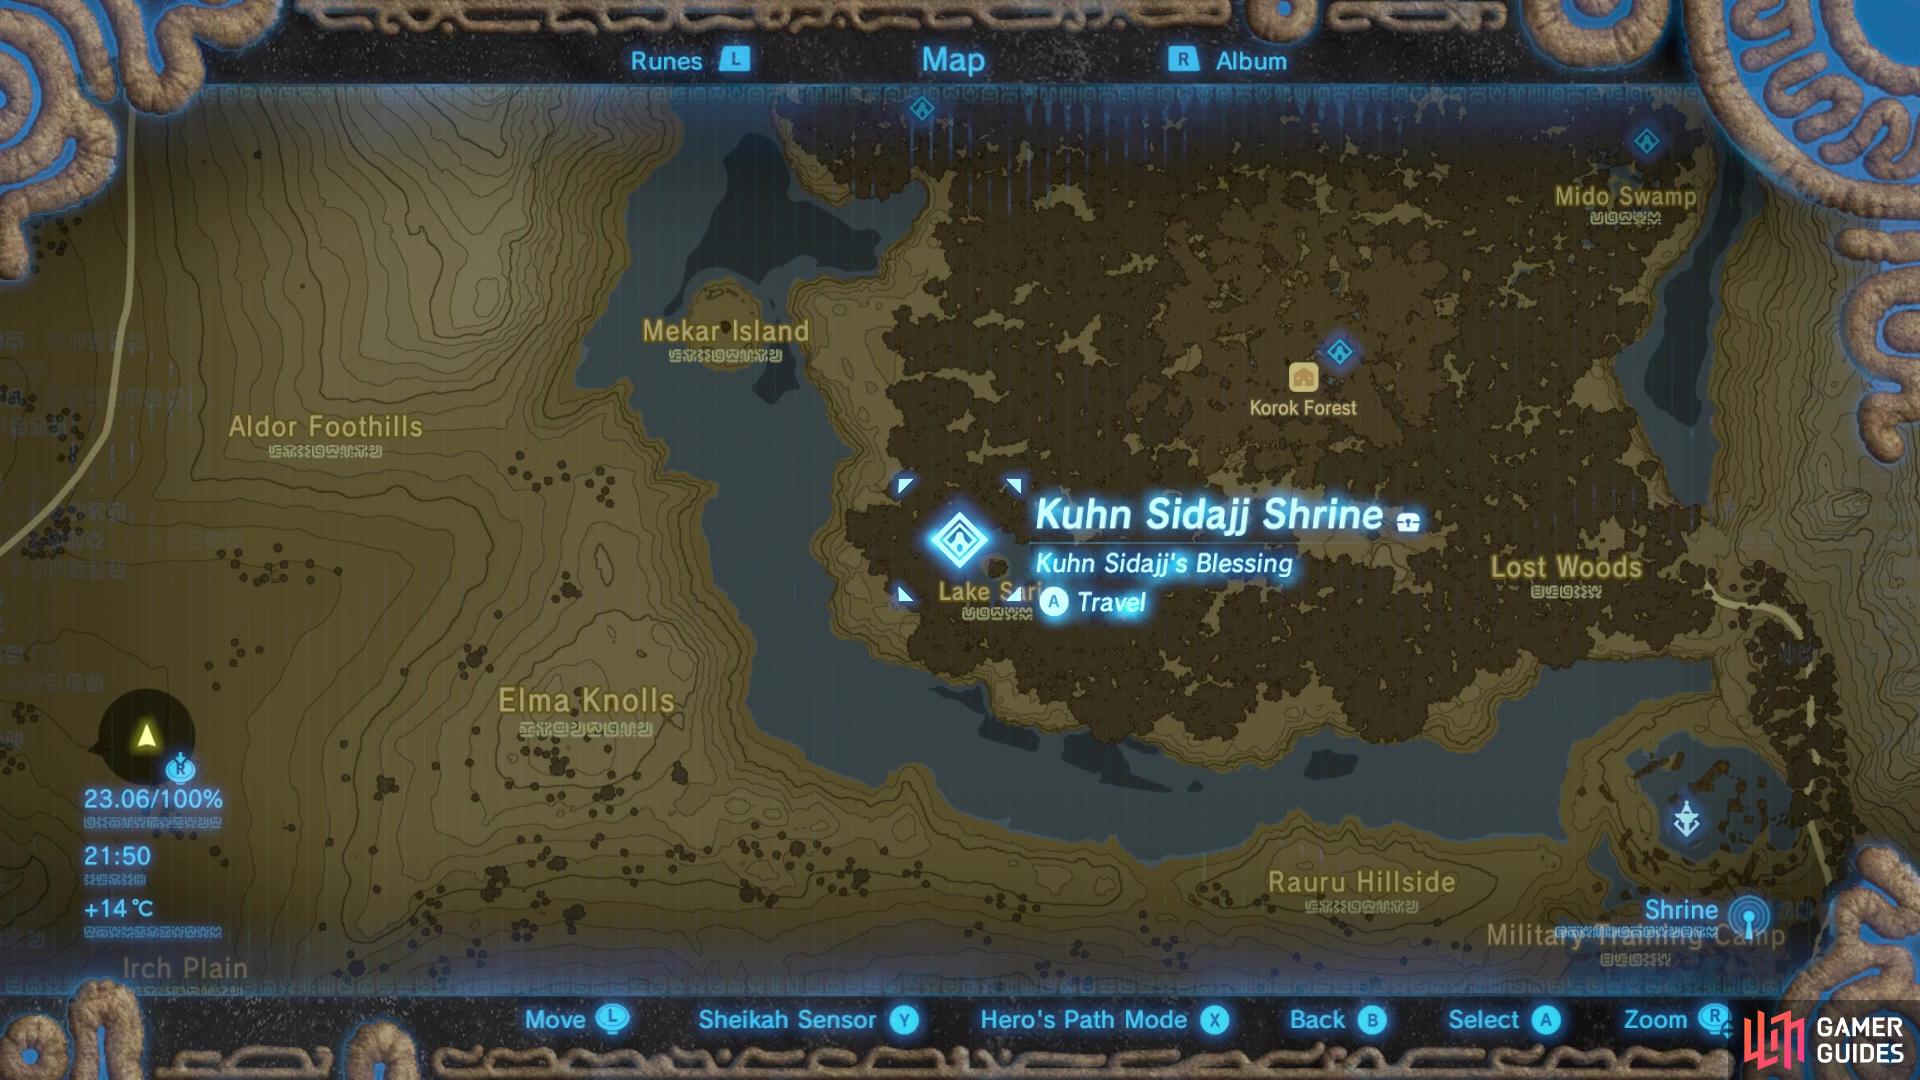 This shrine is found in the southwest region of Great Hyrule Forest.